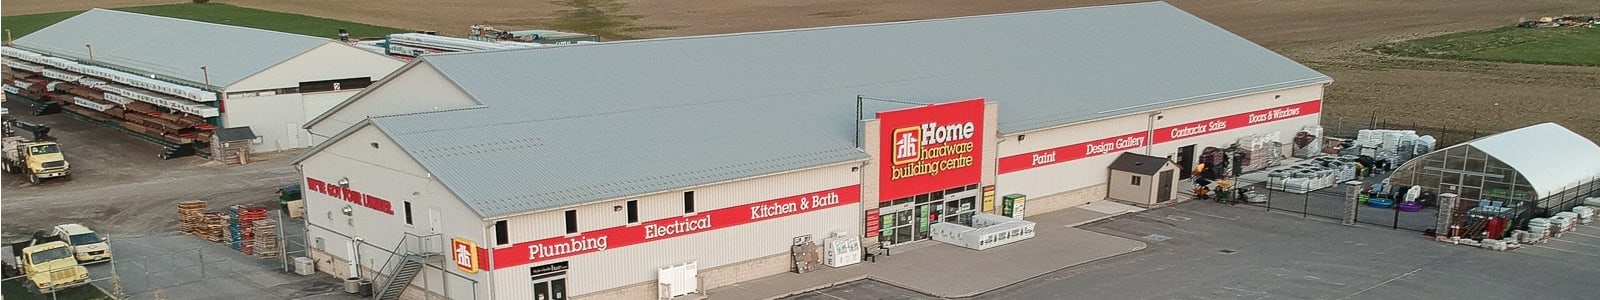 Watford Home Hardware, Home Building Centre in Watford, Ontario